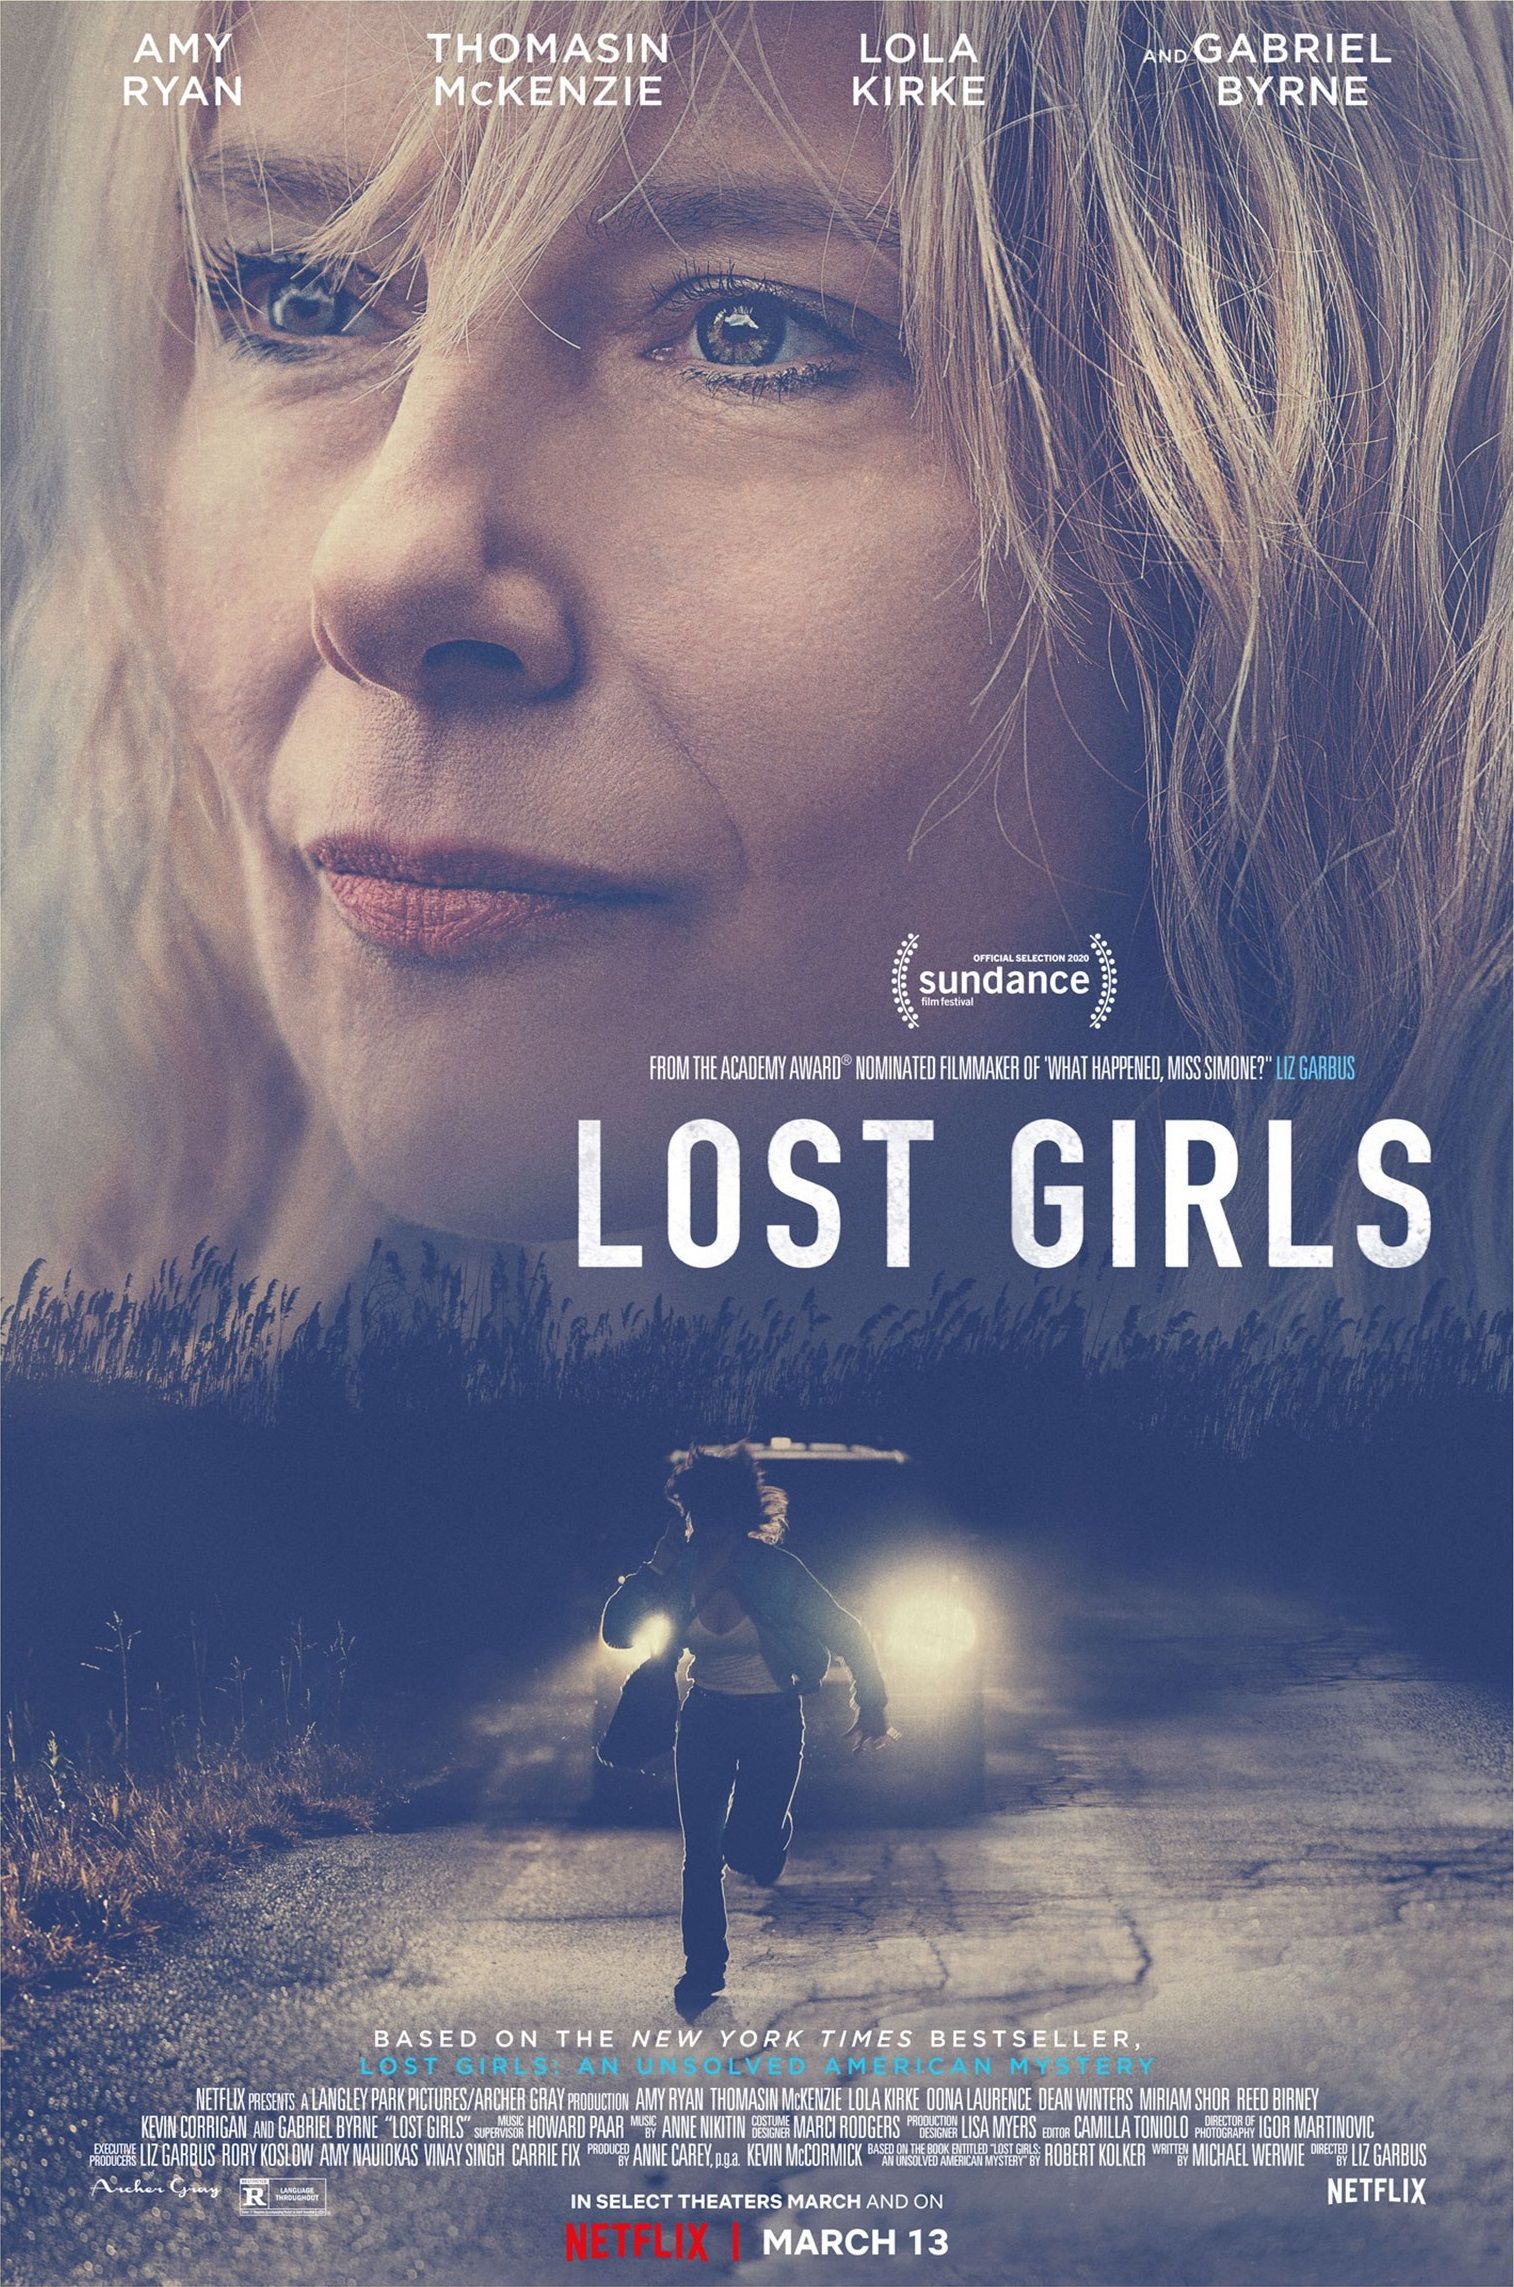 The Lost Girls by Heather Young